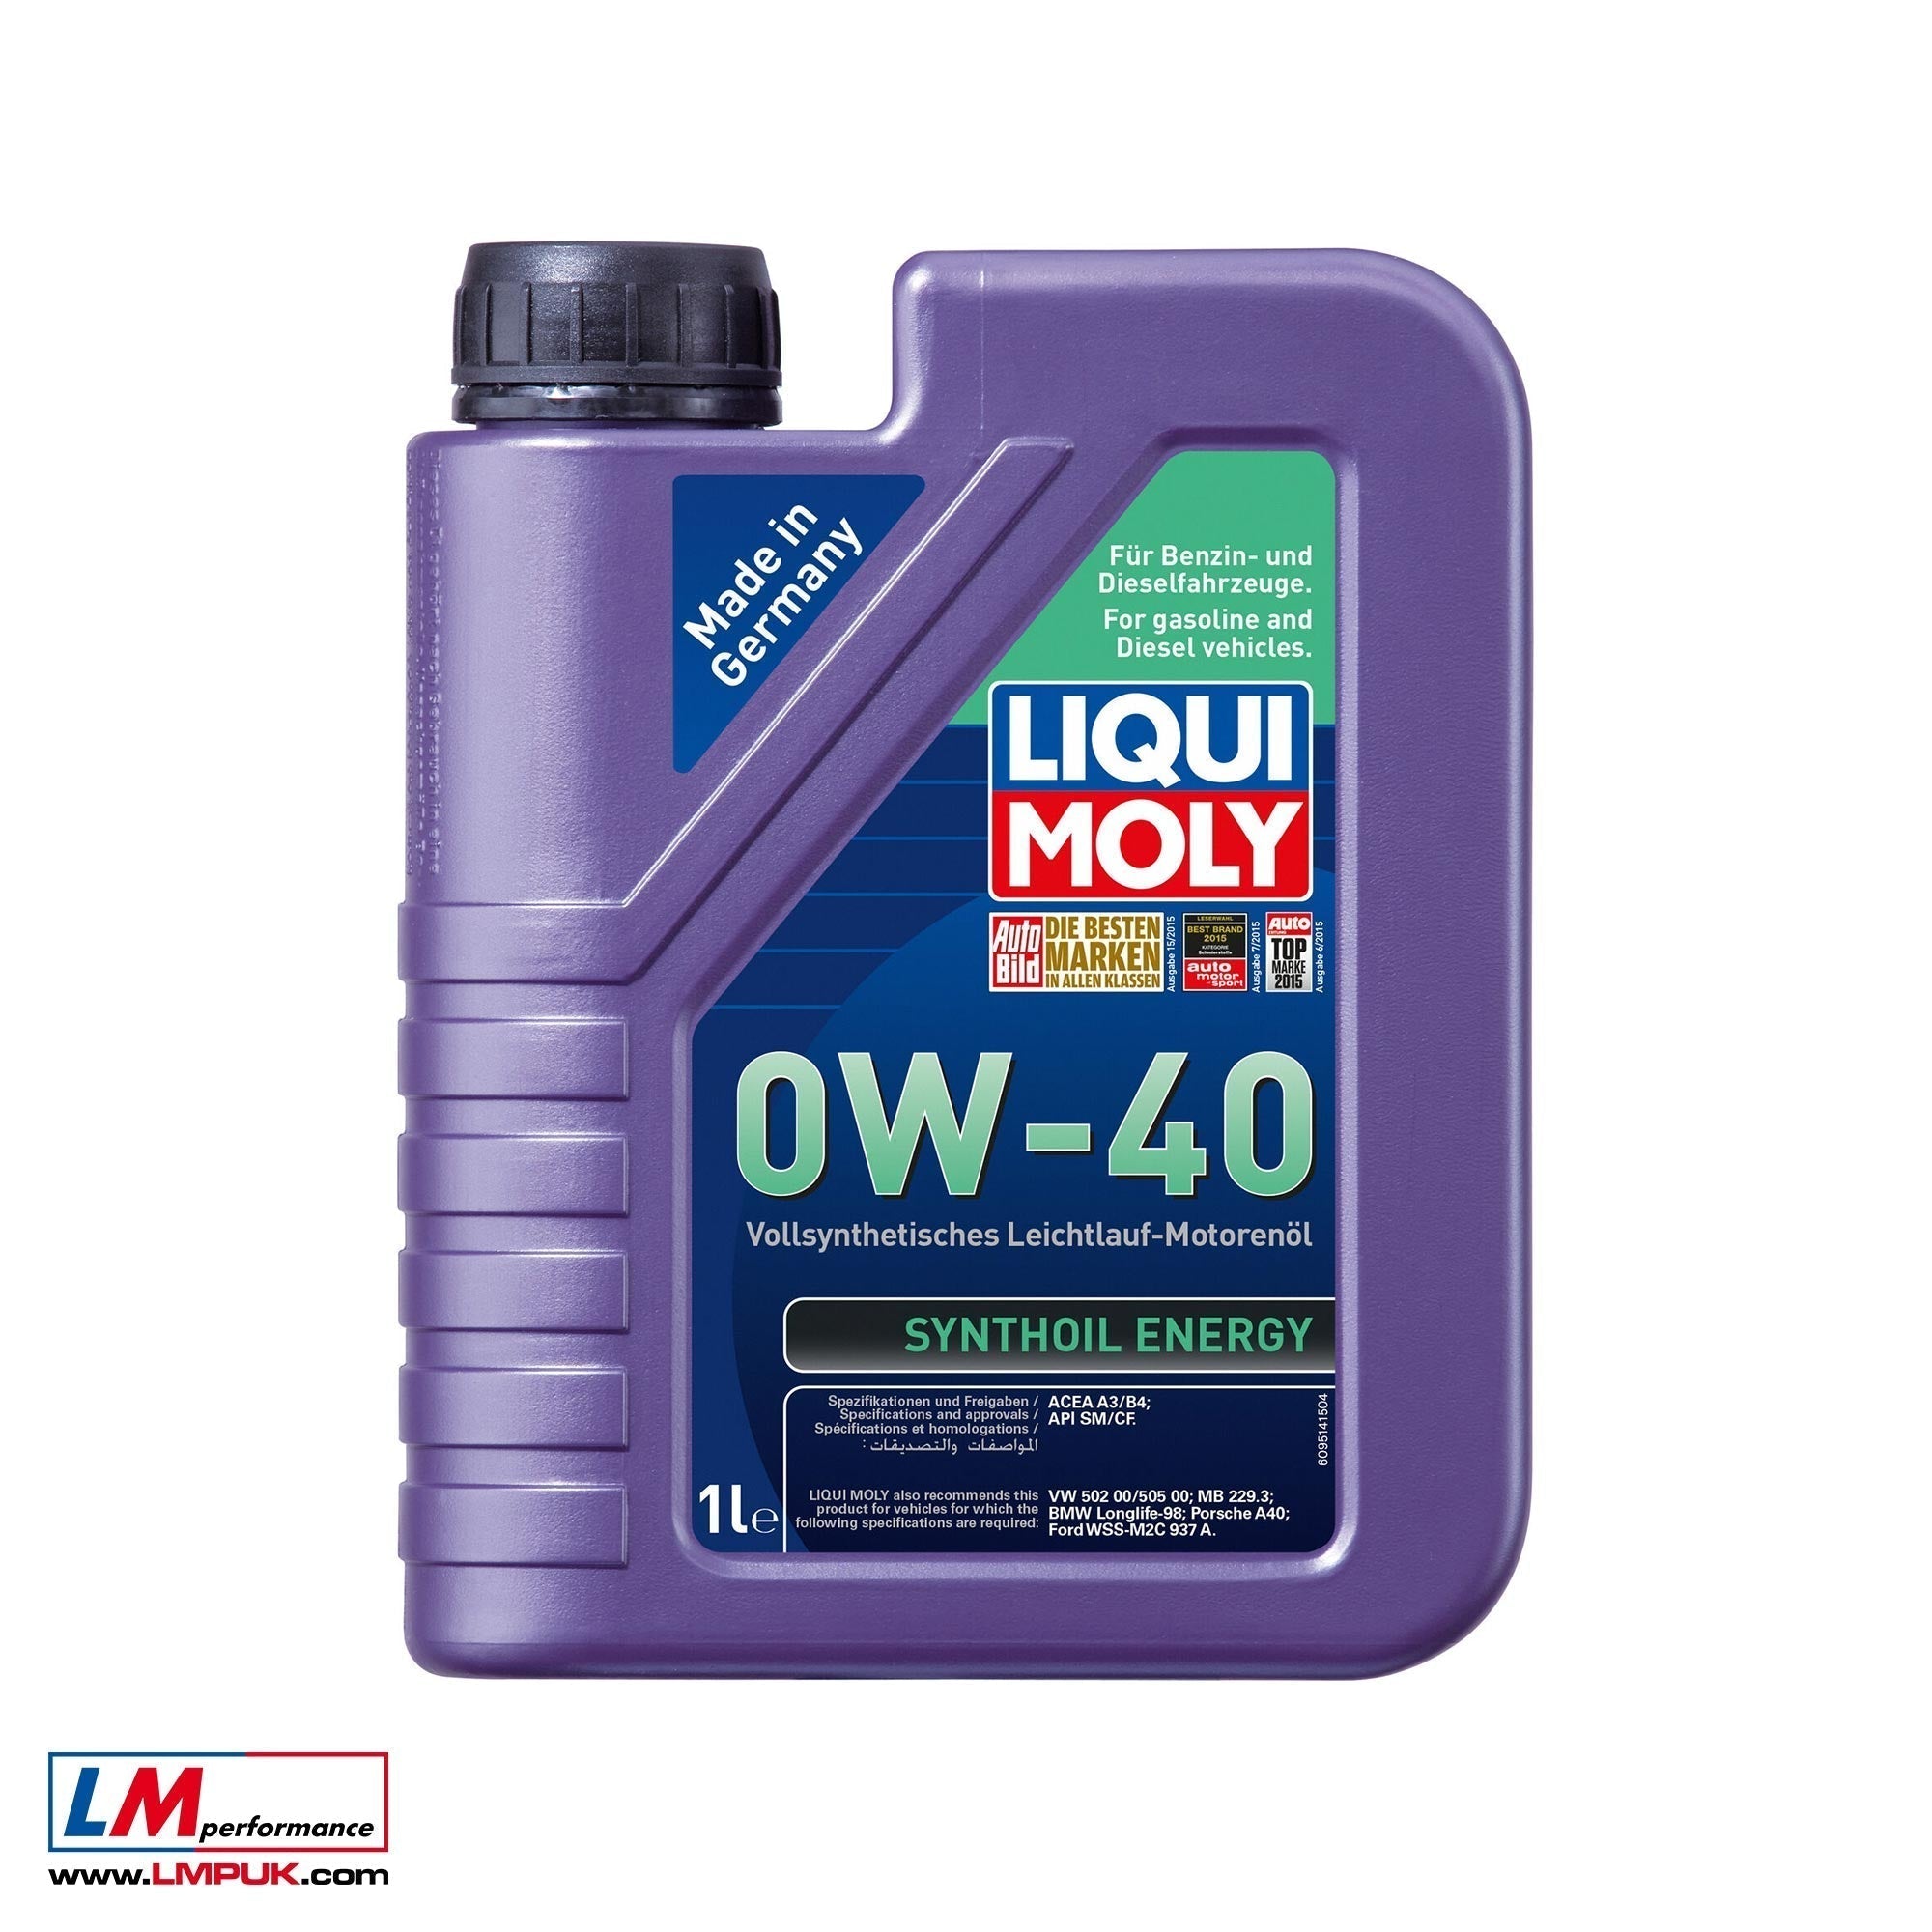 Synthoil Energy 0W-40 Engine Oil by LIQUI MOLY